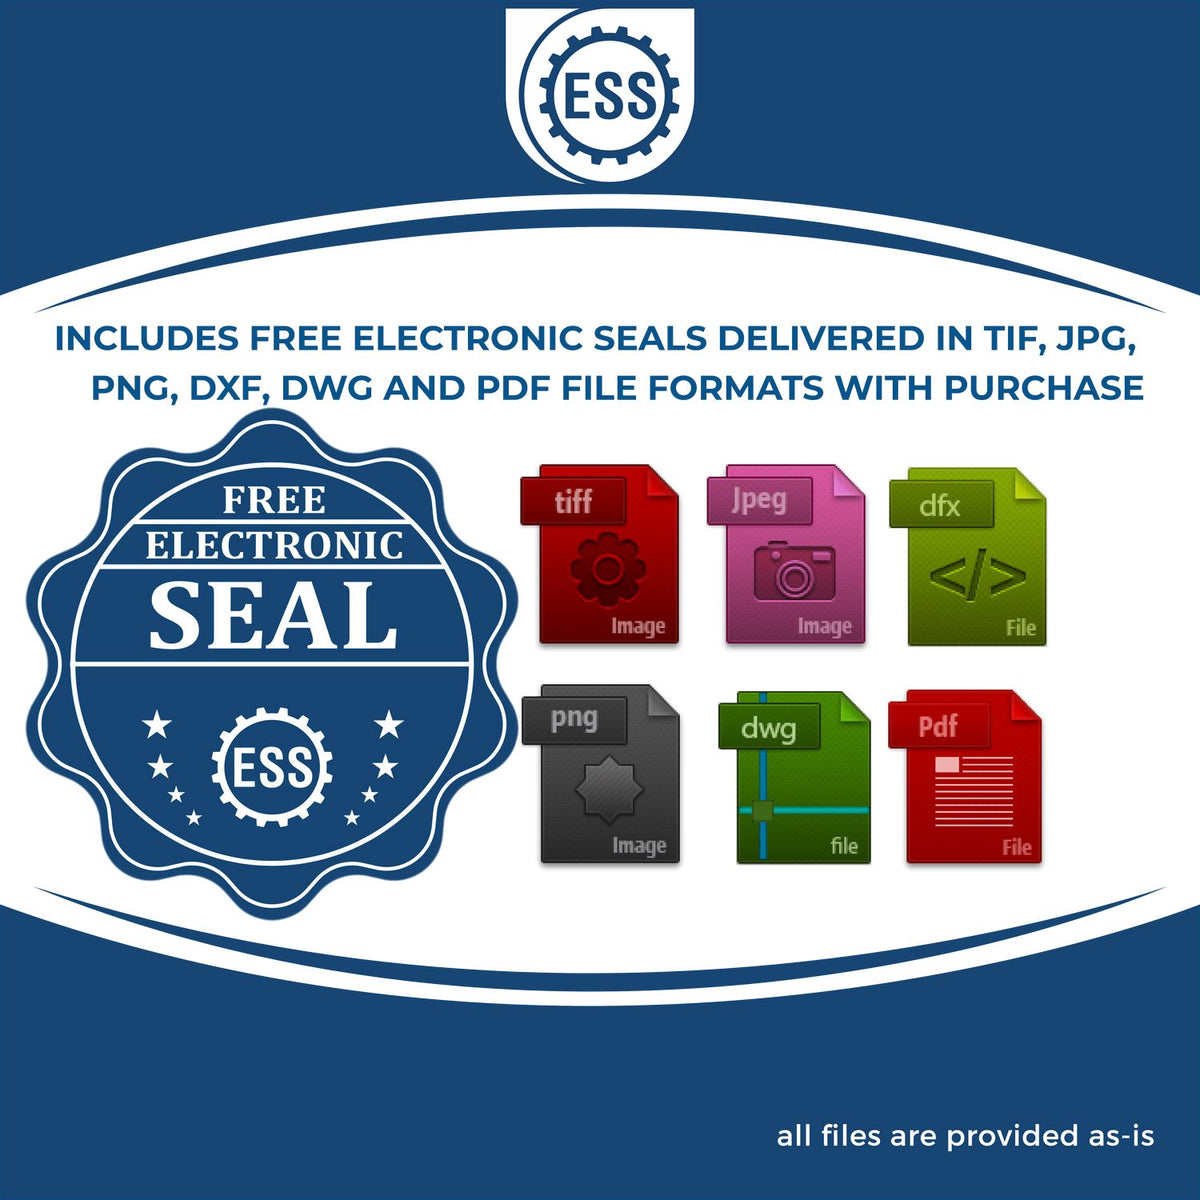 An infographic for the free electronic seal for the Slim Pre-Inked Nebraska Professional Geologist Seal Stamp illustrating the different file type icons such as DXF, DWG, TIF, JPG and PNG.